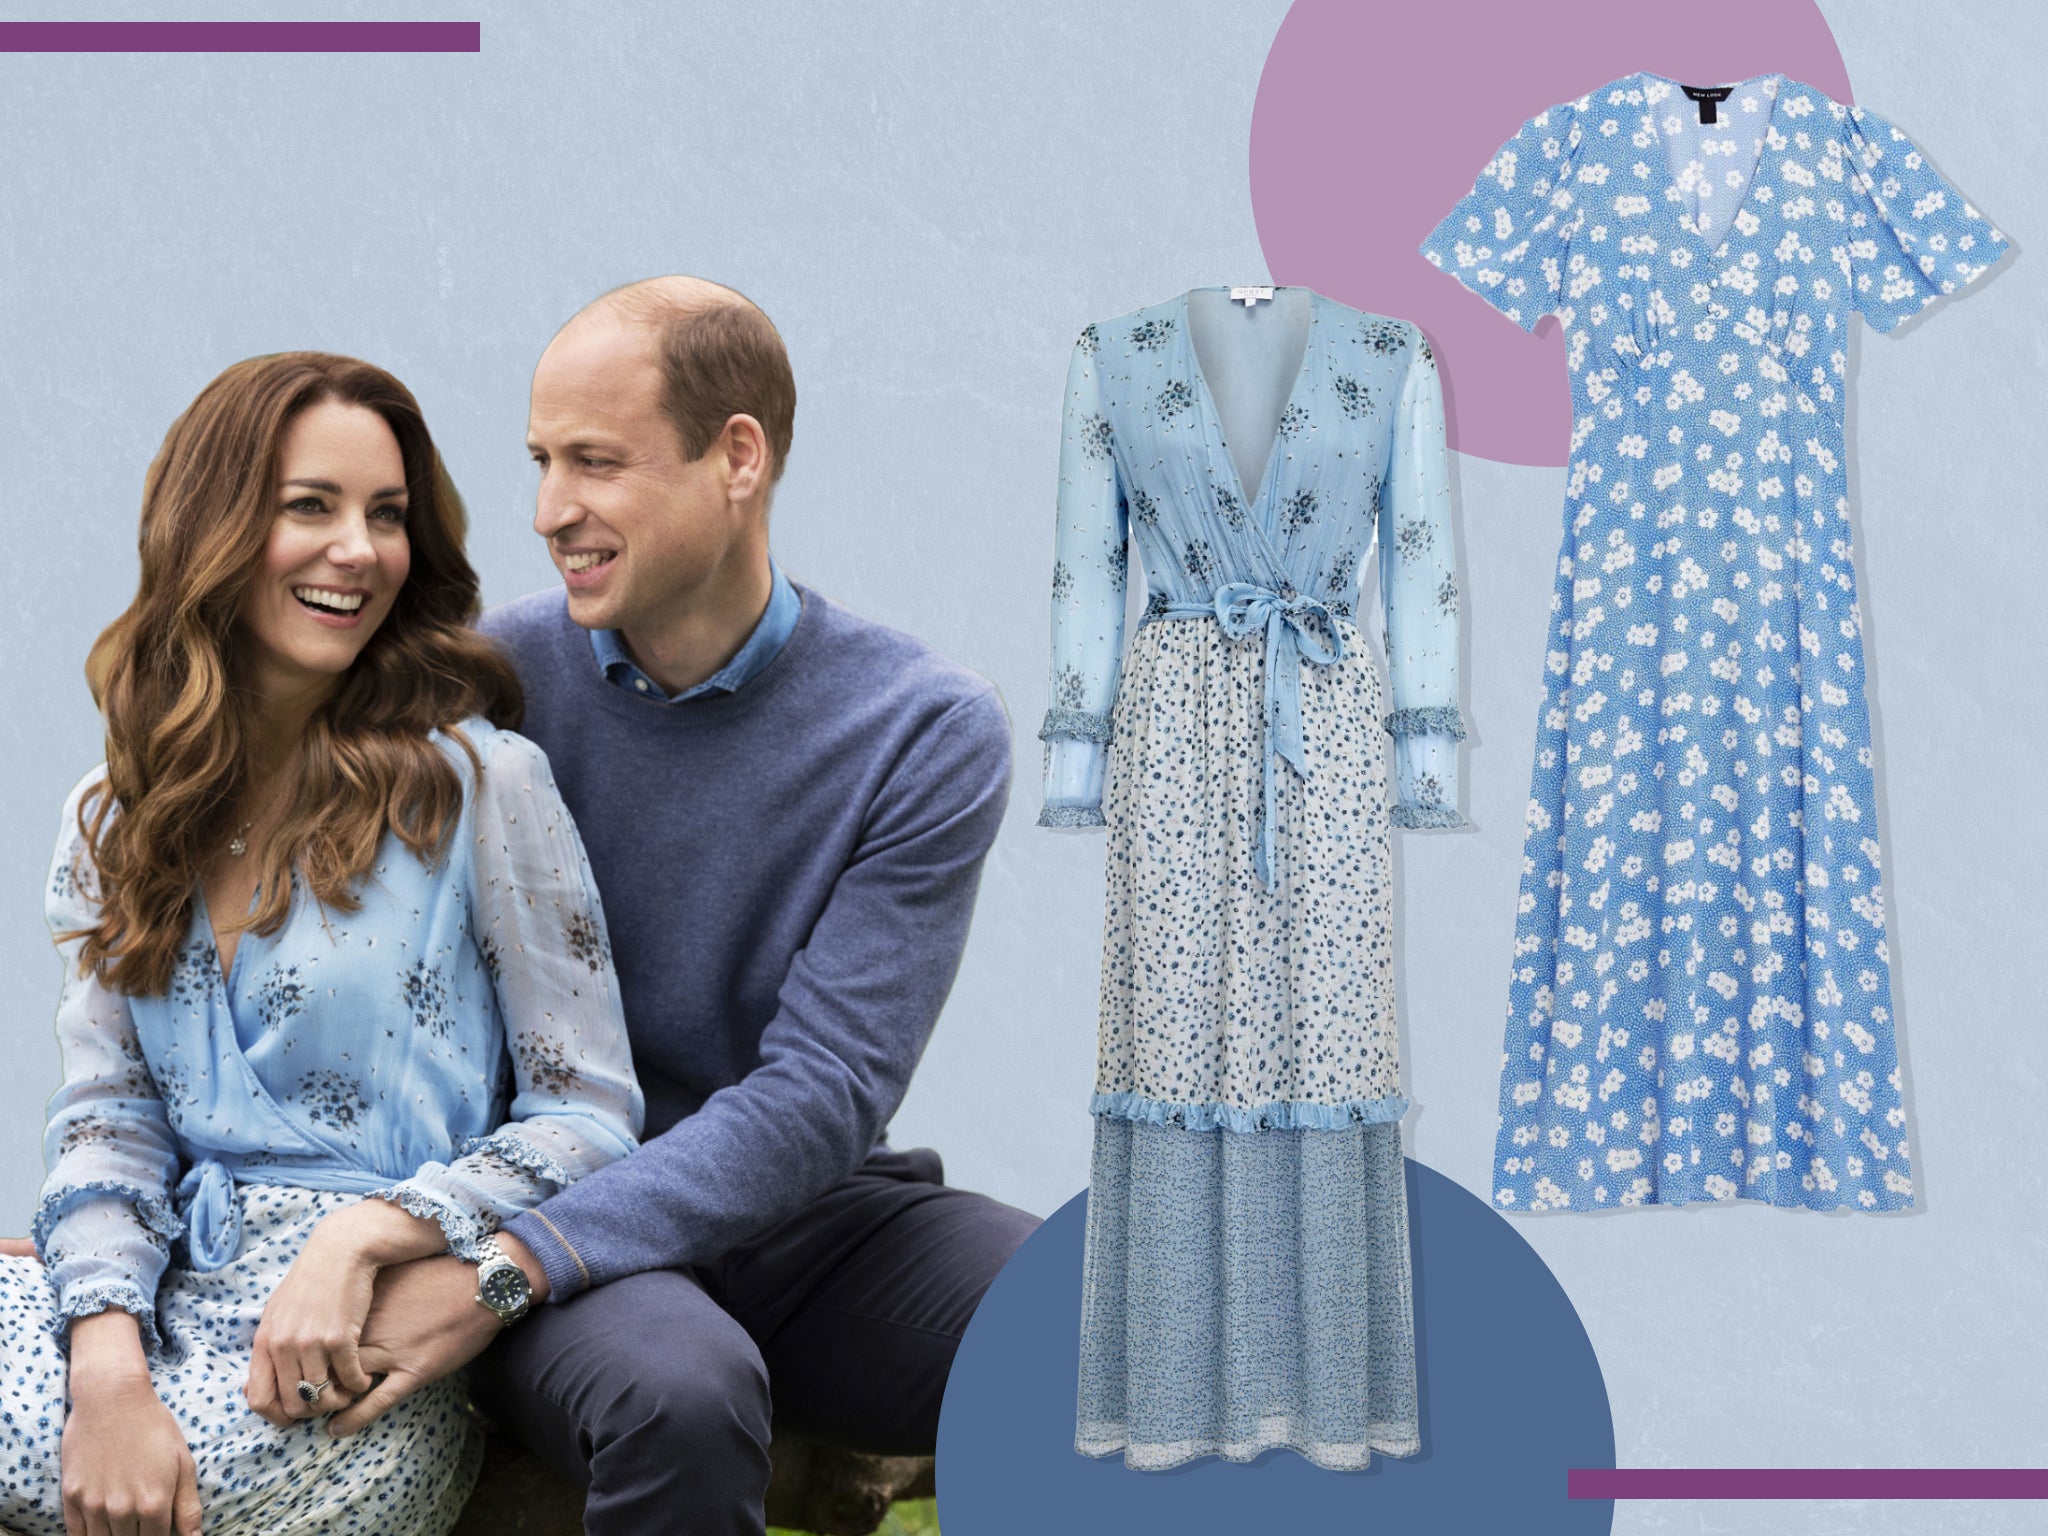 The duchess wore the outfit to mark her 10th wedding anniversary